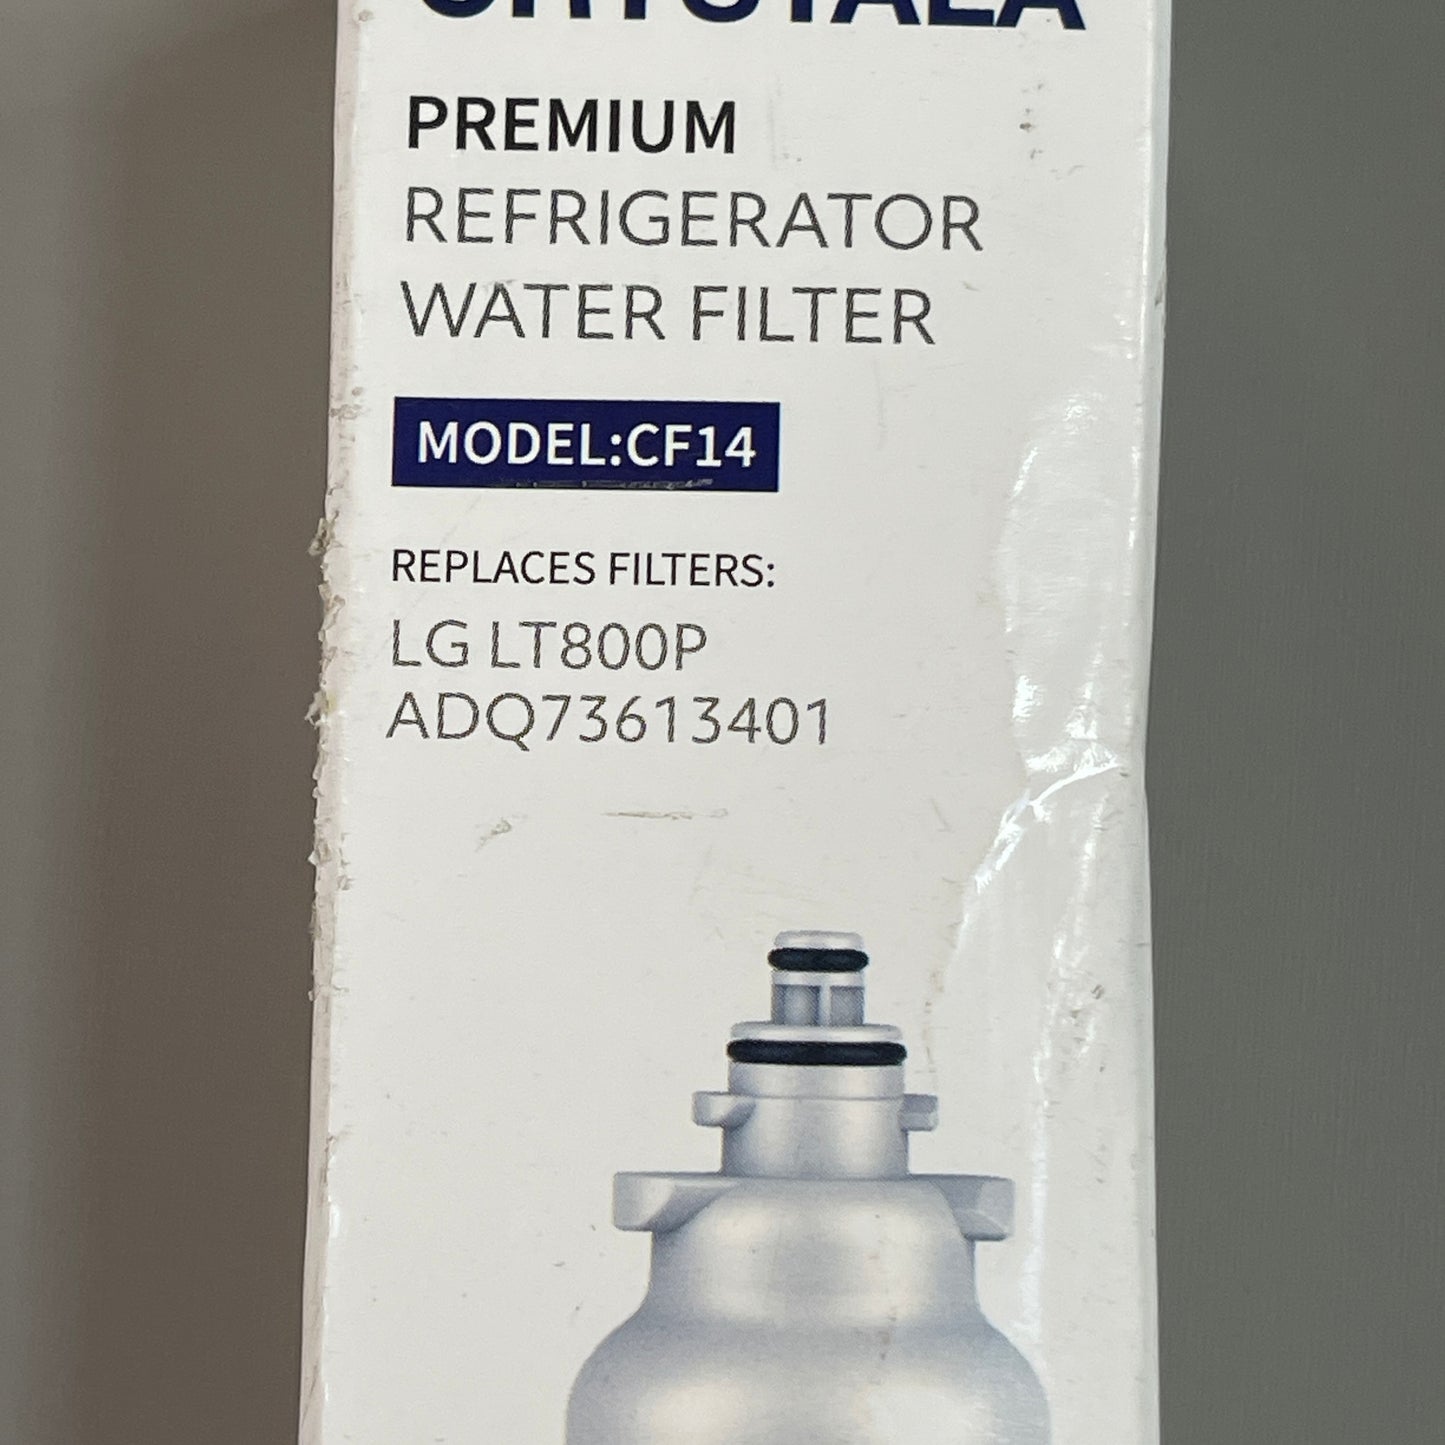 CRYSTALA Premium Refrigerator Water Filter Replacement CF41 Replaces LG Lt800P ADQ73613401 (New)